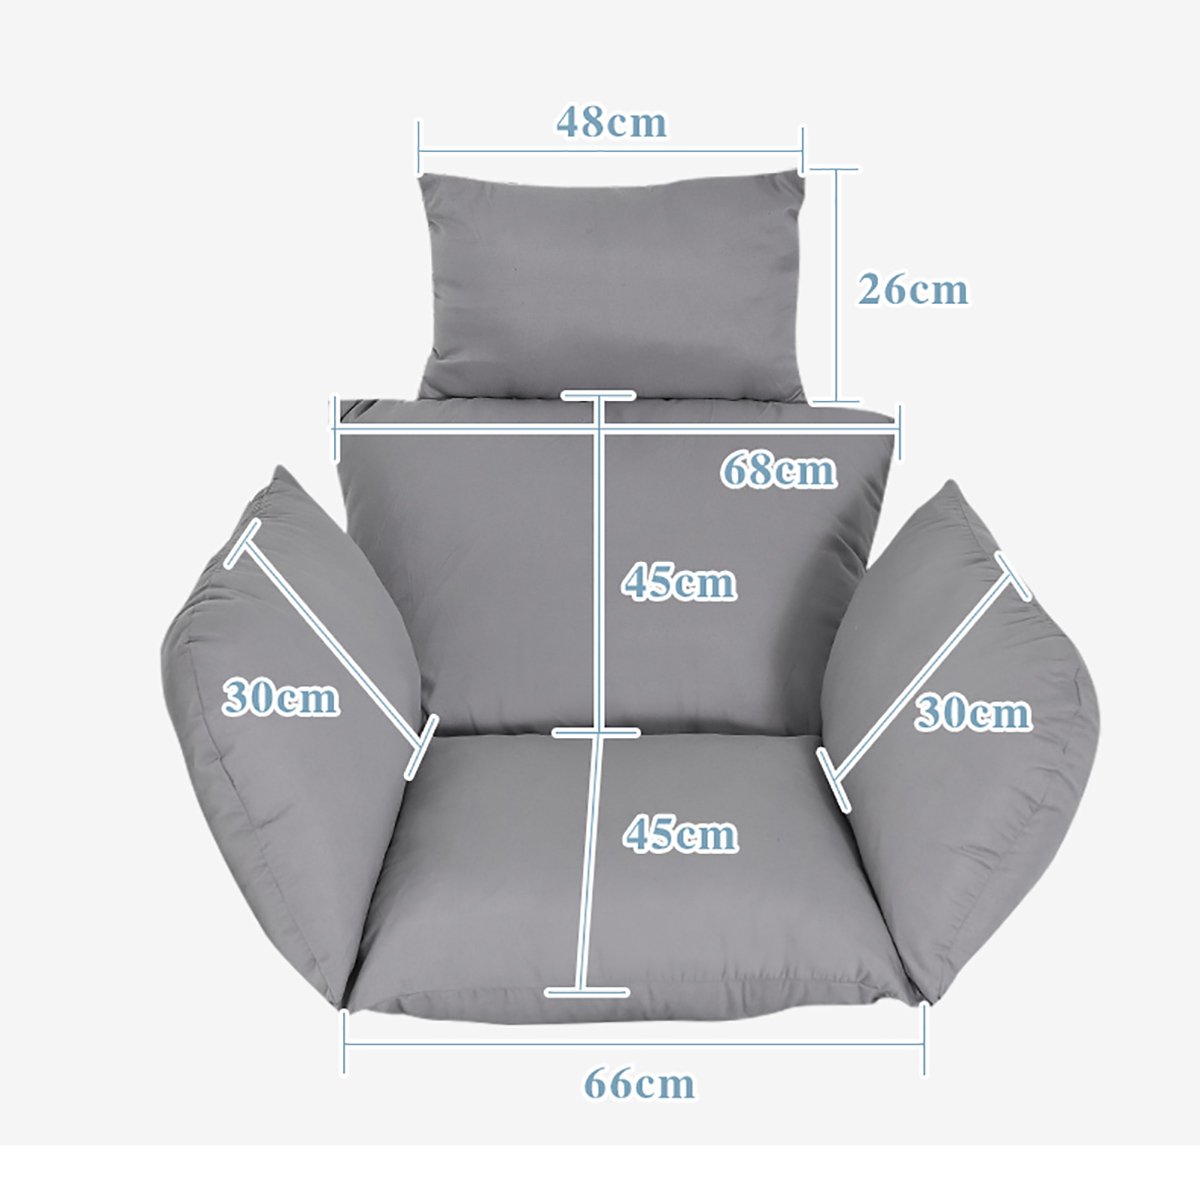 Hammock Chair Cushion 6D Hollow Cotton Strong Elasticity Cushion Swing Seat Cushion Thick Hanging Chair Back With Pillow